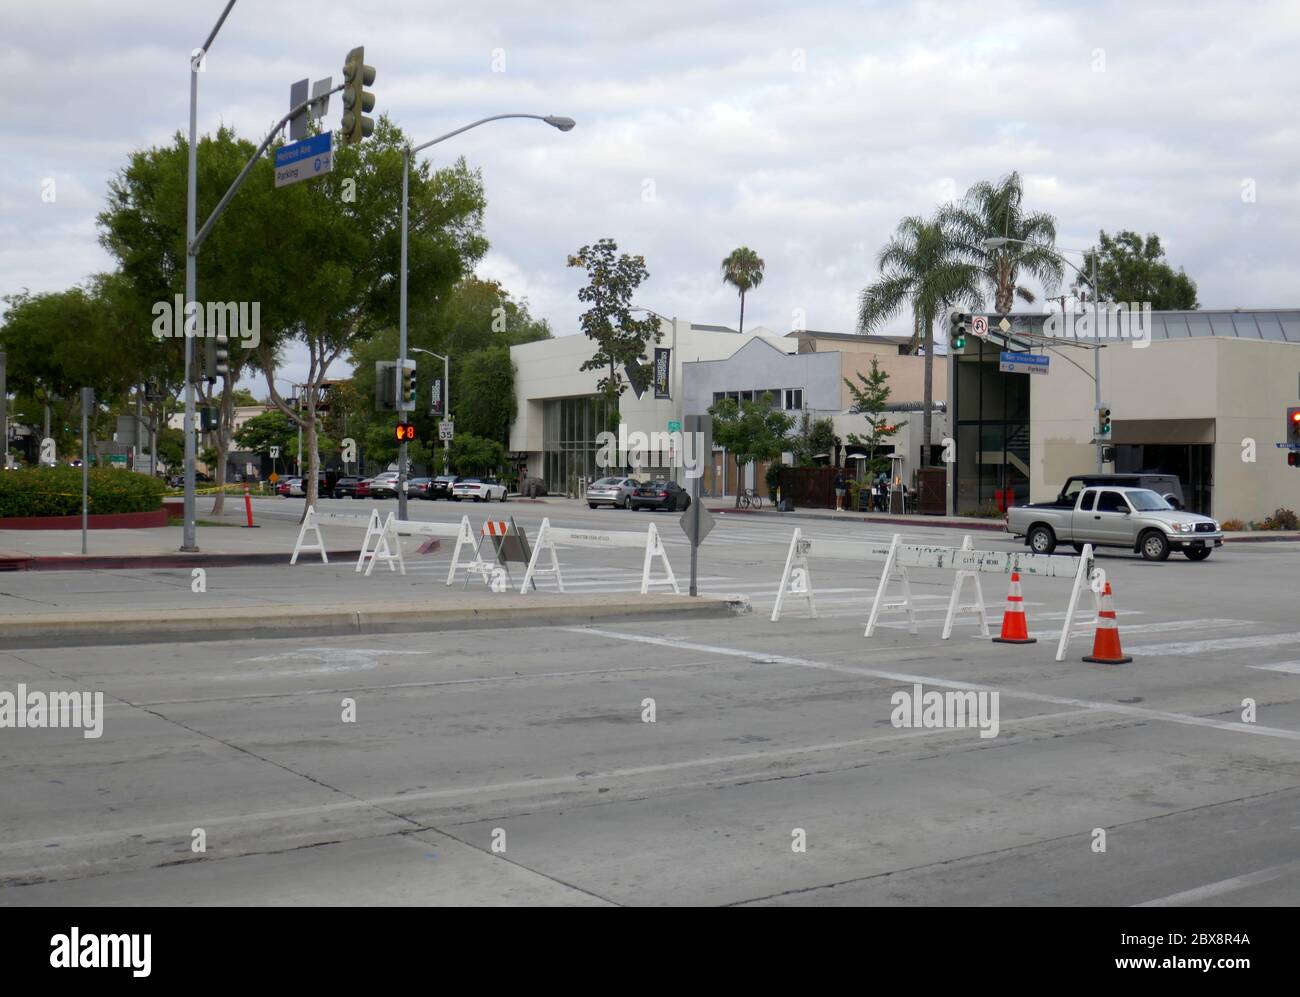 Los Angeles, California USA 5th June 2020 A general view of atmosphere of closed blocked off street as Black Lives Matter Protests happen all over Los Angeles during Coronavirus Covid-19 pandemic on June 5, 2020 in Los Angeles, California, USA. Photo by Barry King/Alamy Stock Photo Stock Photo